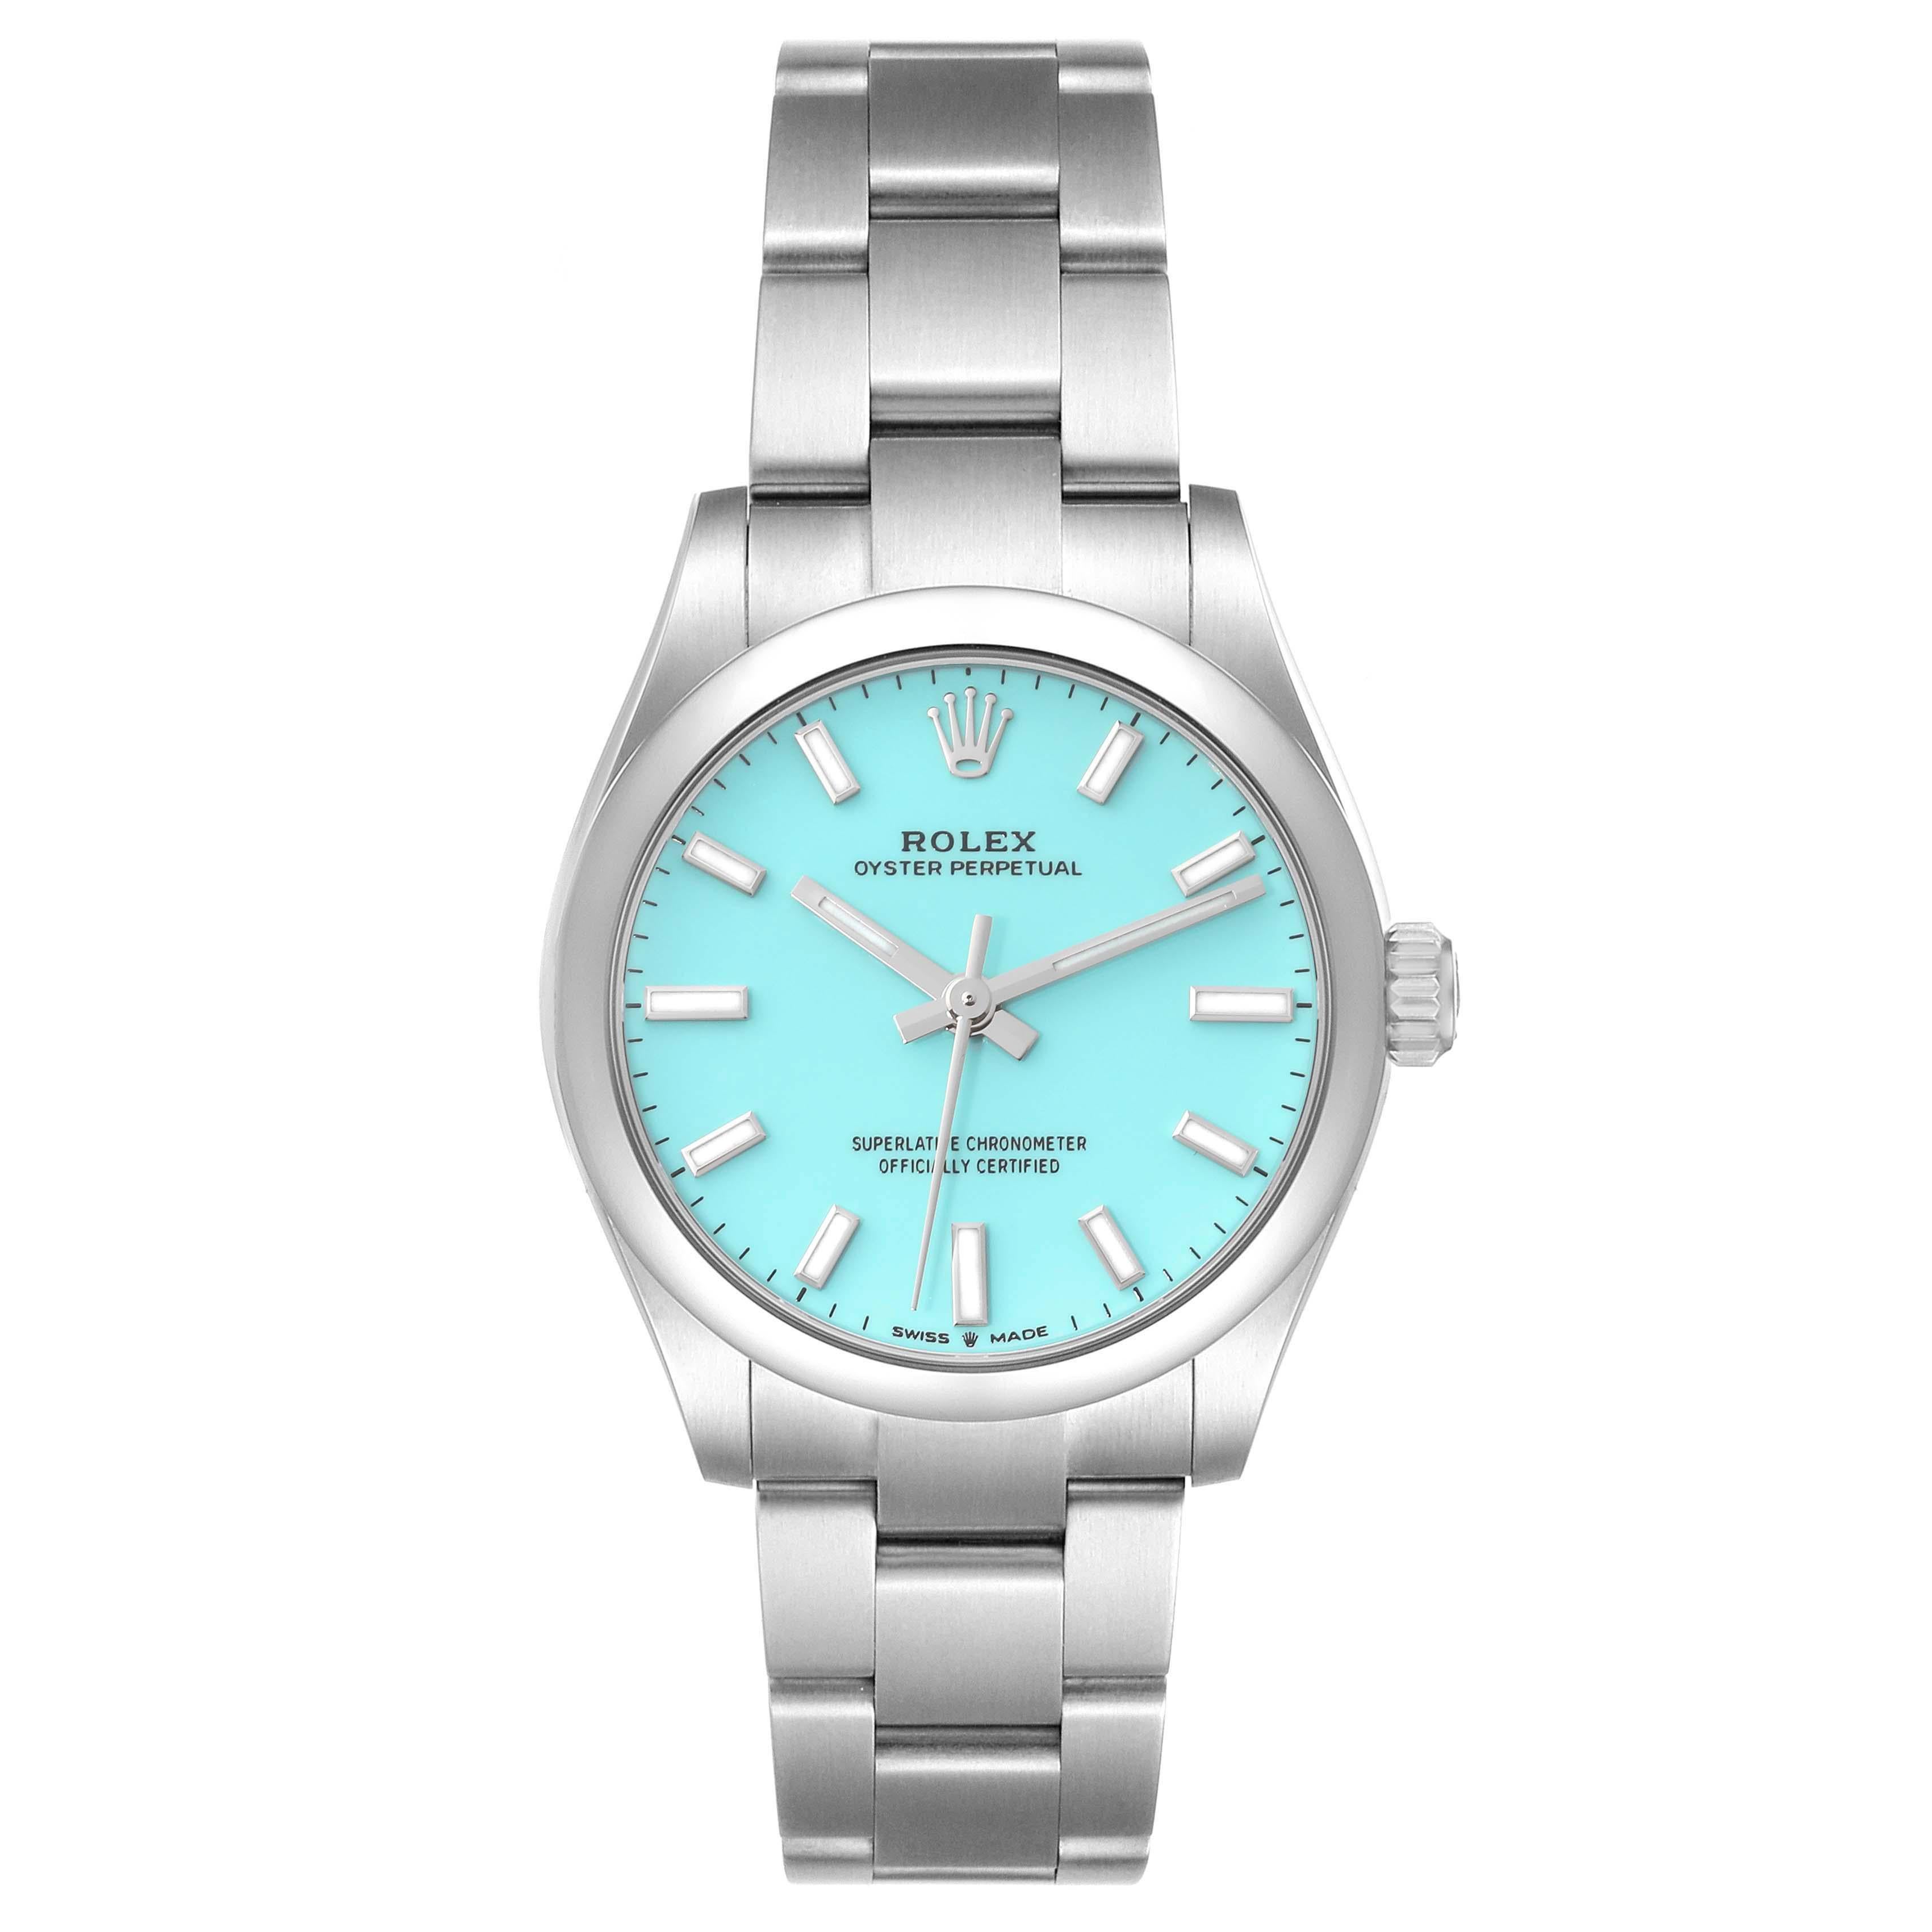 Rolex Oyster Perpetual Midsize Turquoise Dial Steel Ladies Watch 277200 Box Card. Automatic self-winding movement. Stainless steel oyster case 31.0 mm in diameter. Rolex logo on a crown. Stainless steel smooth bezel. Scratch resistant sapphire